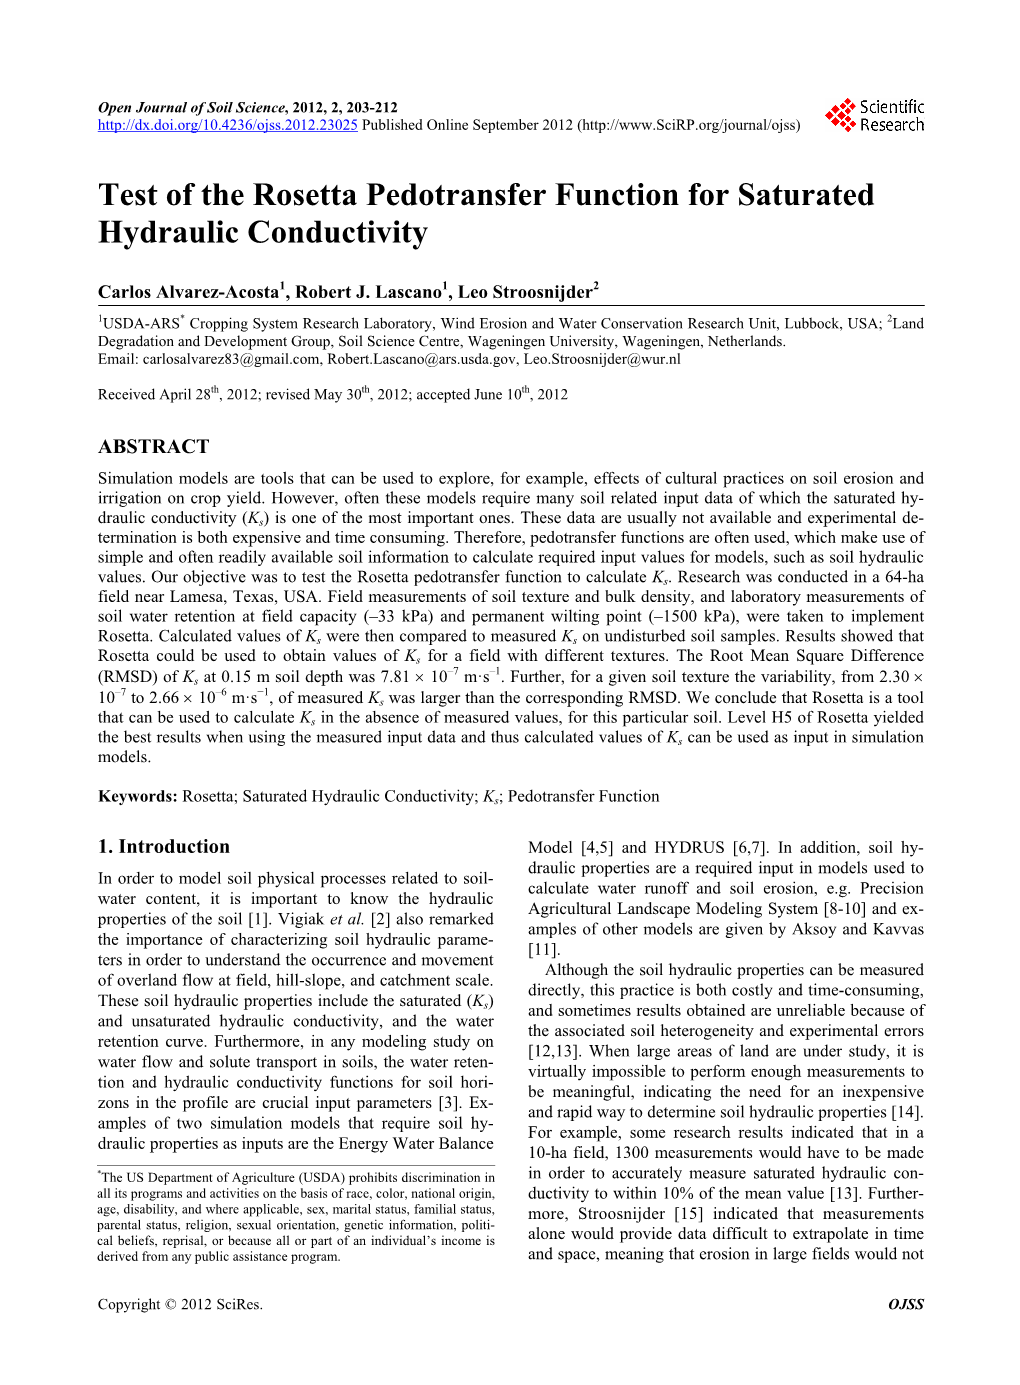 Test of the Rosetta Pedotransfer Function for Saturated Hydraulic Conductivity